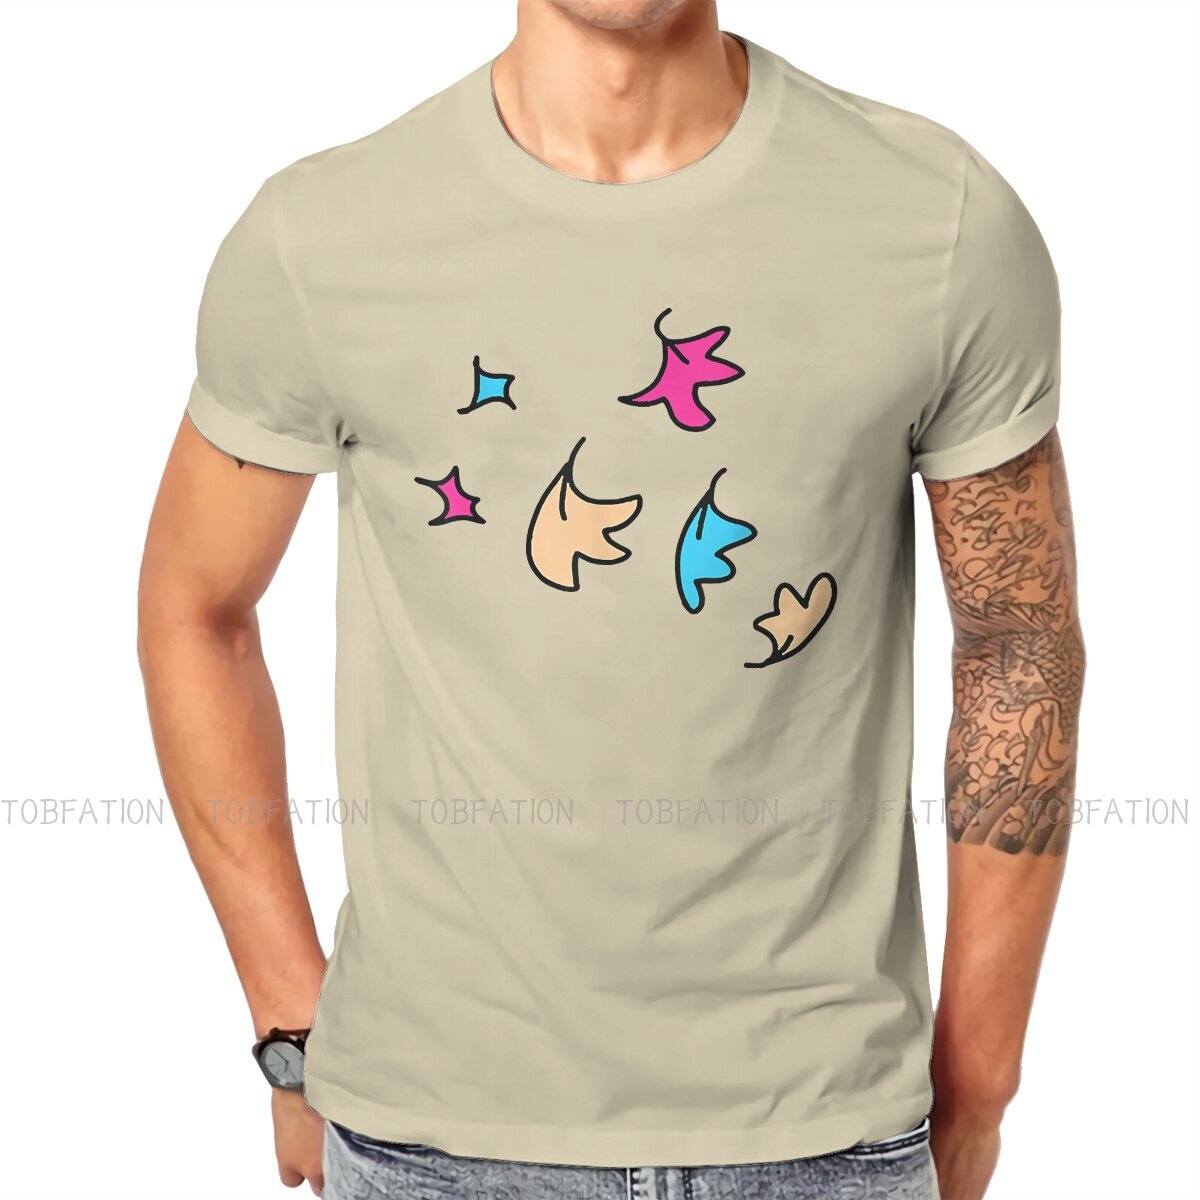 leaves symbol lover hip hop tshirt alice oseman heartstopper comic creative tops leisure t shirt male tee unique gift clothes 7981